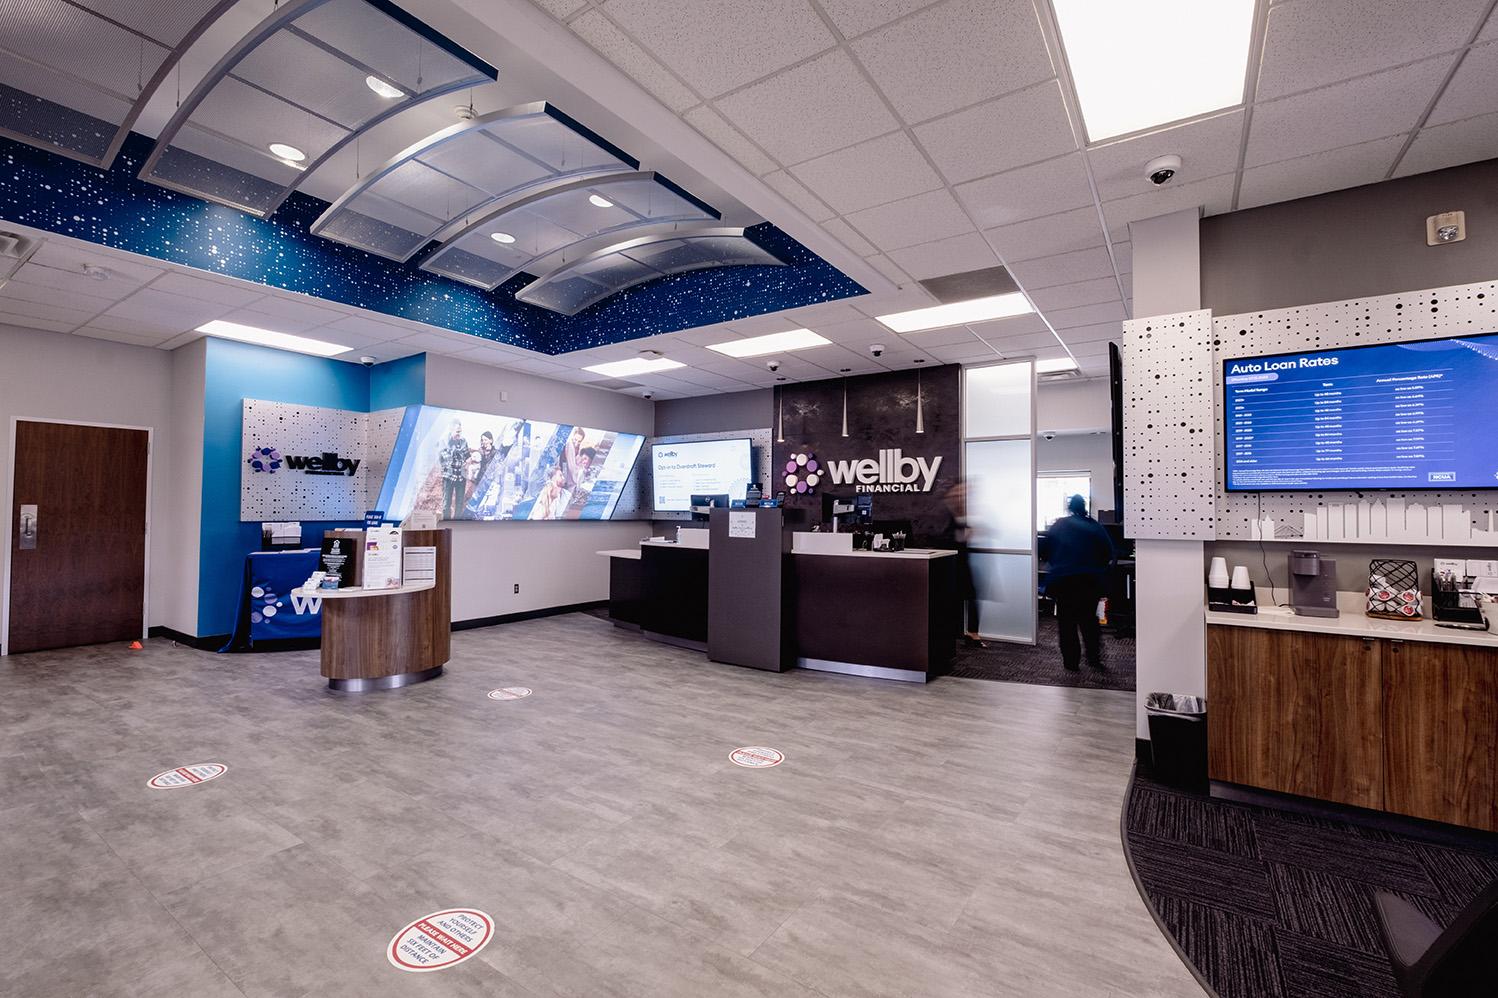 Interior lobby of federal credit union with finance professionals Wellby Financial Dickinson (281)488-7070